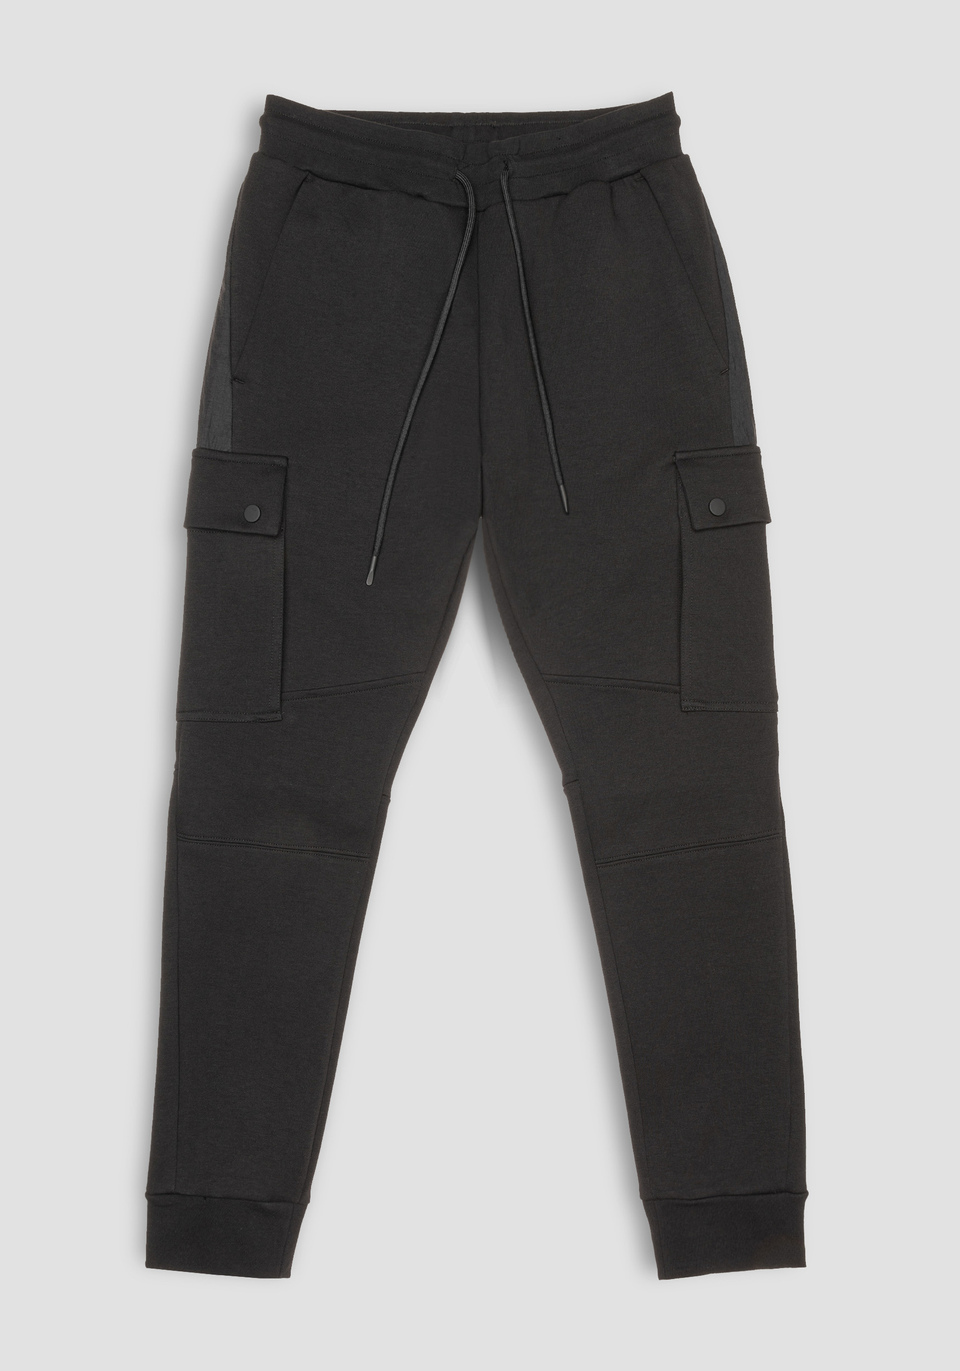 SWEATPANTS WITH LARGE POCKETS AND A SIDE STRIPE - Antony Morato Online Shop